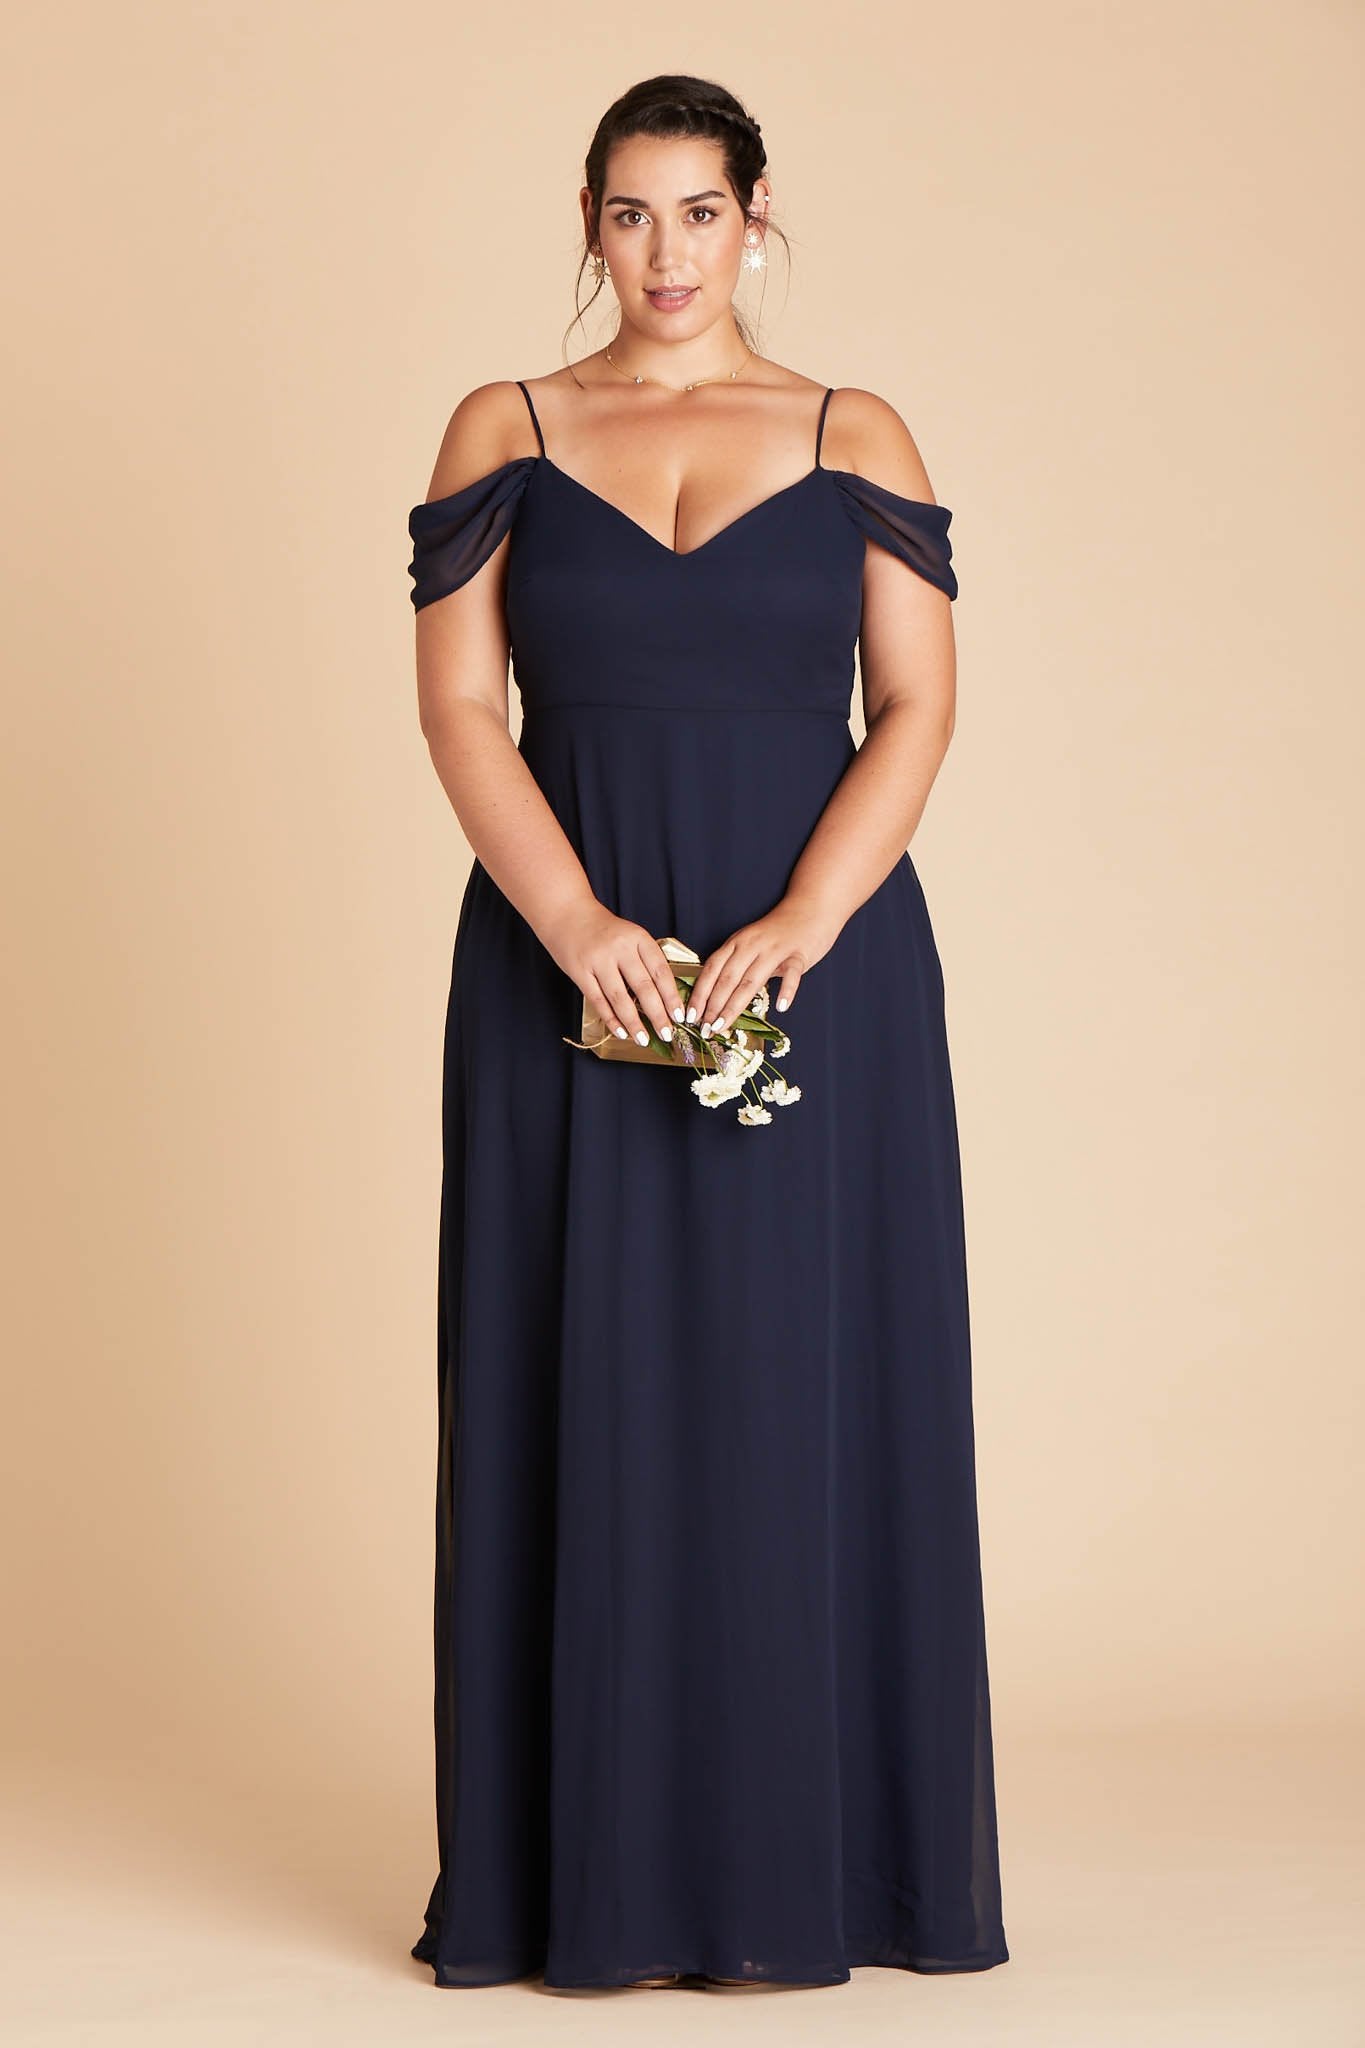 Devin convertible plus size bridesmaids dress in navy blue chiffon by Birdy Grey, front view